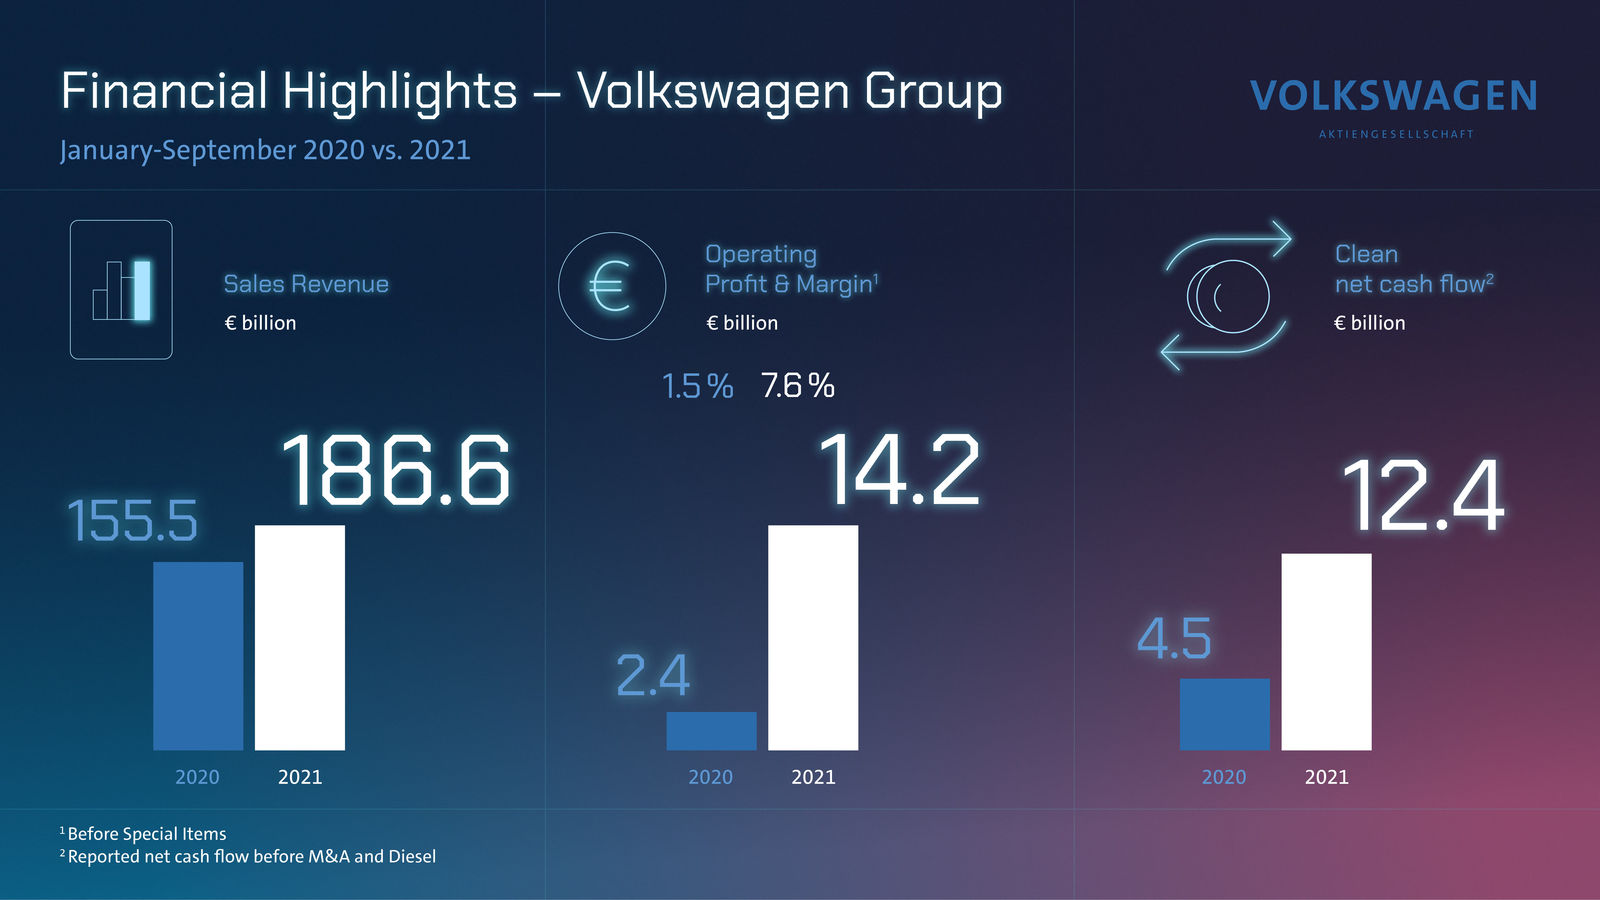 Volkswagen Group’s Q3 result down year-on-year due to semiconductor bottlenecks – profitability tar-get for 2021 confirmed